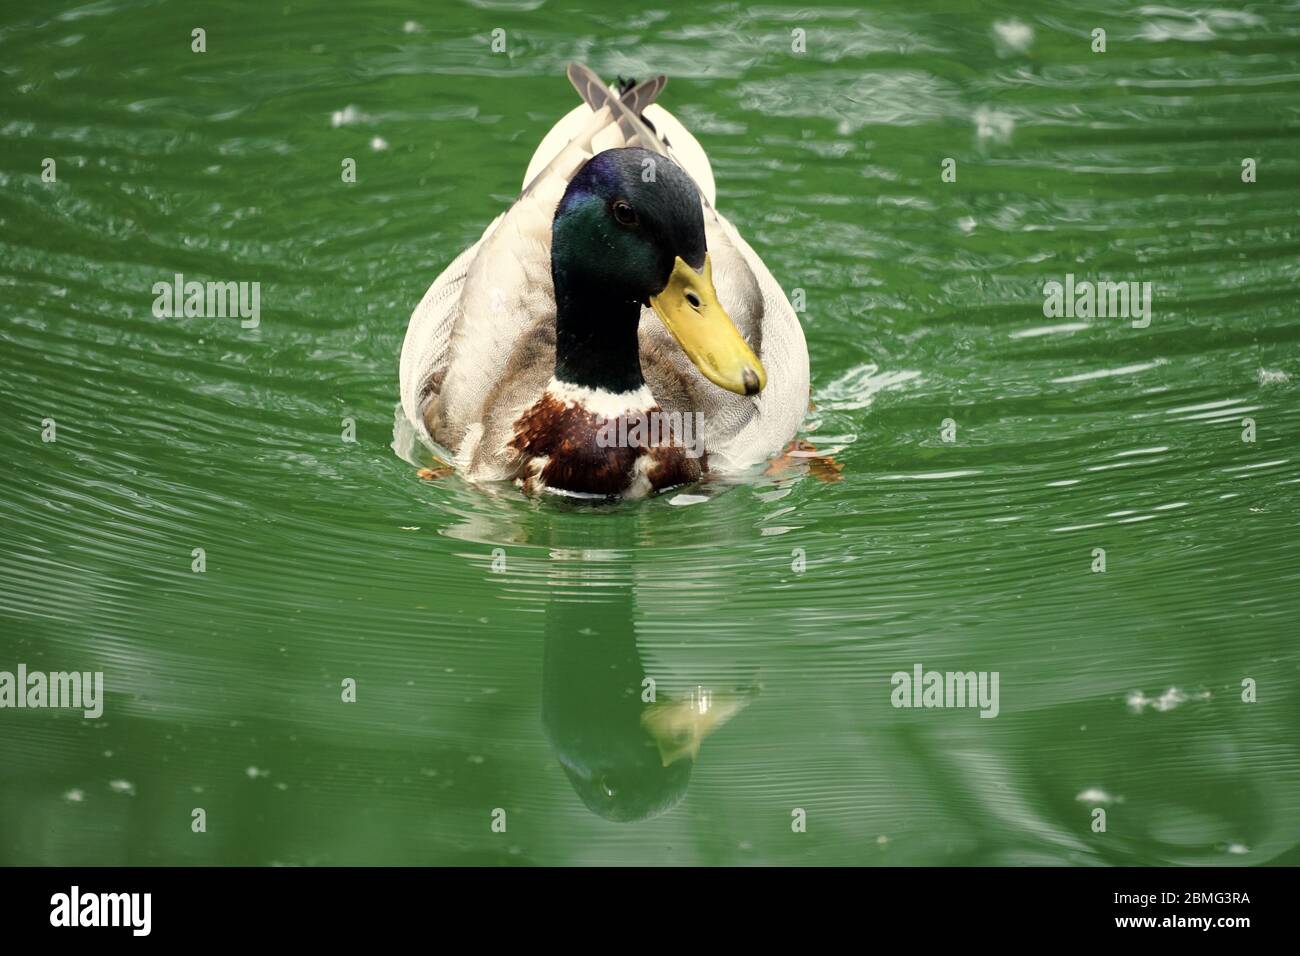 Single male duck on the water floating facing to the left side. Colourful photography, close-up. Reflections of the duck on the water surface. Stock Photo